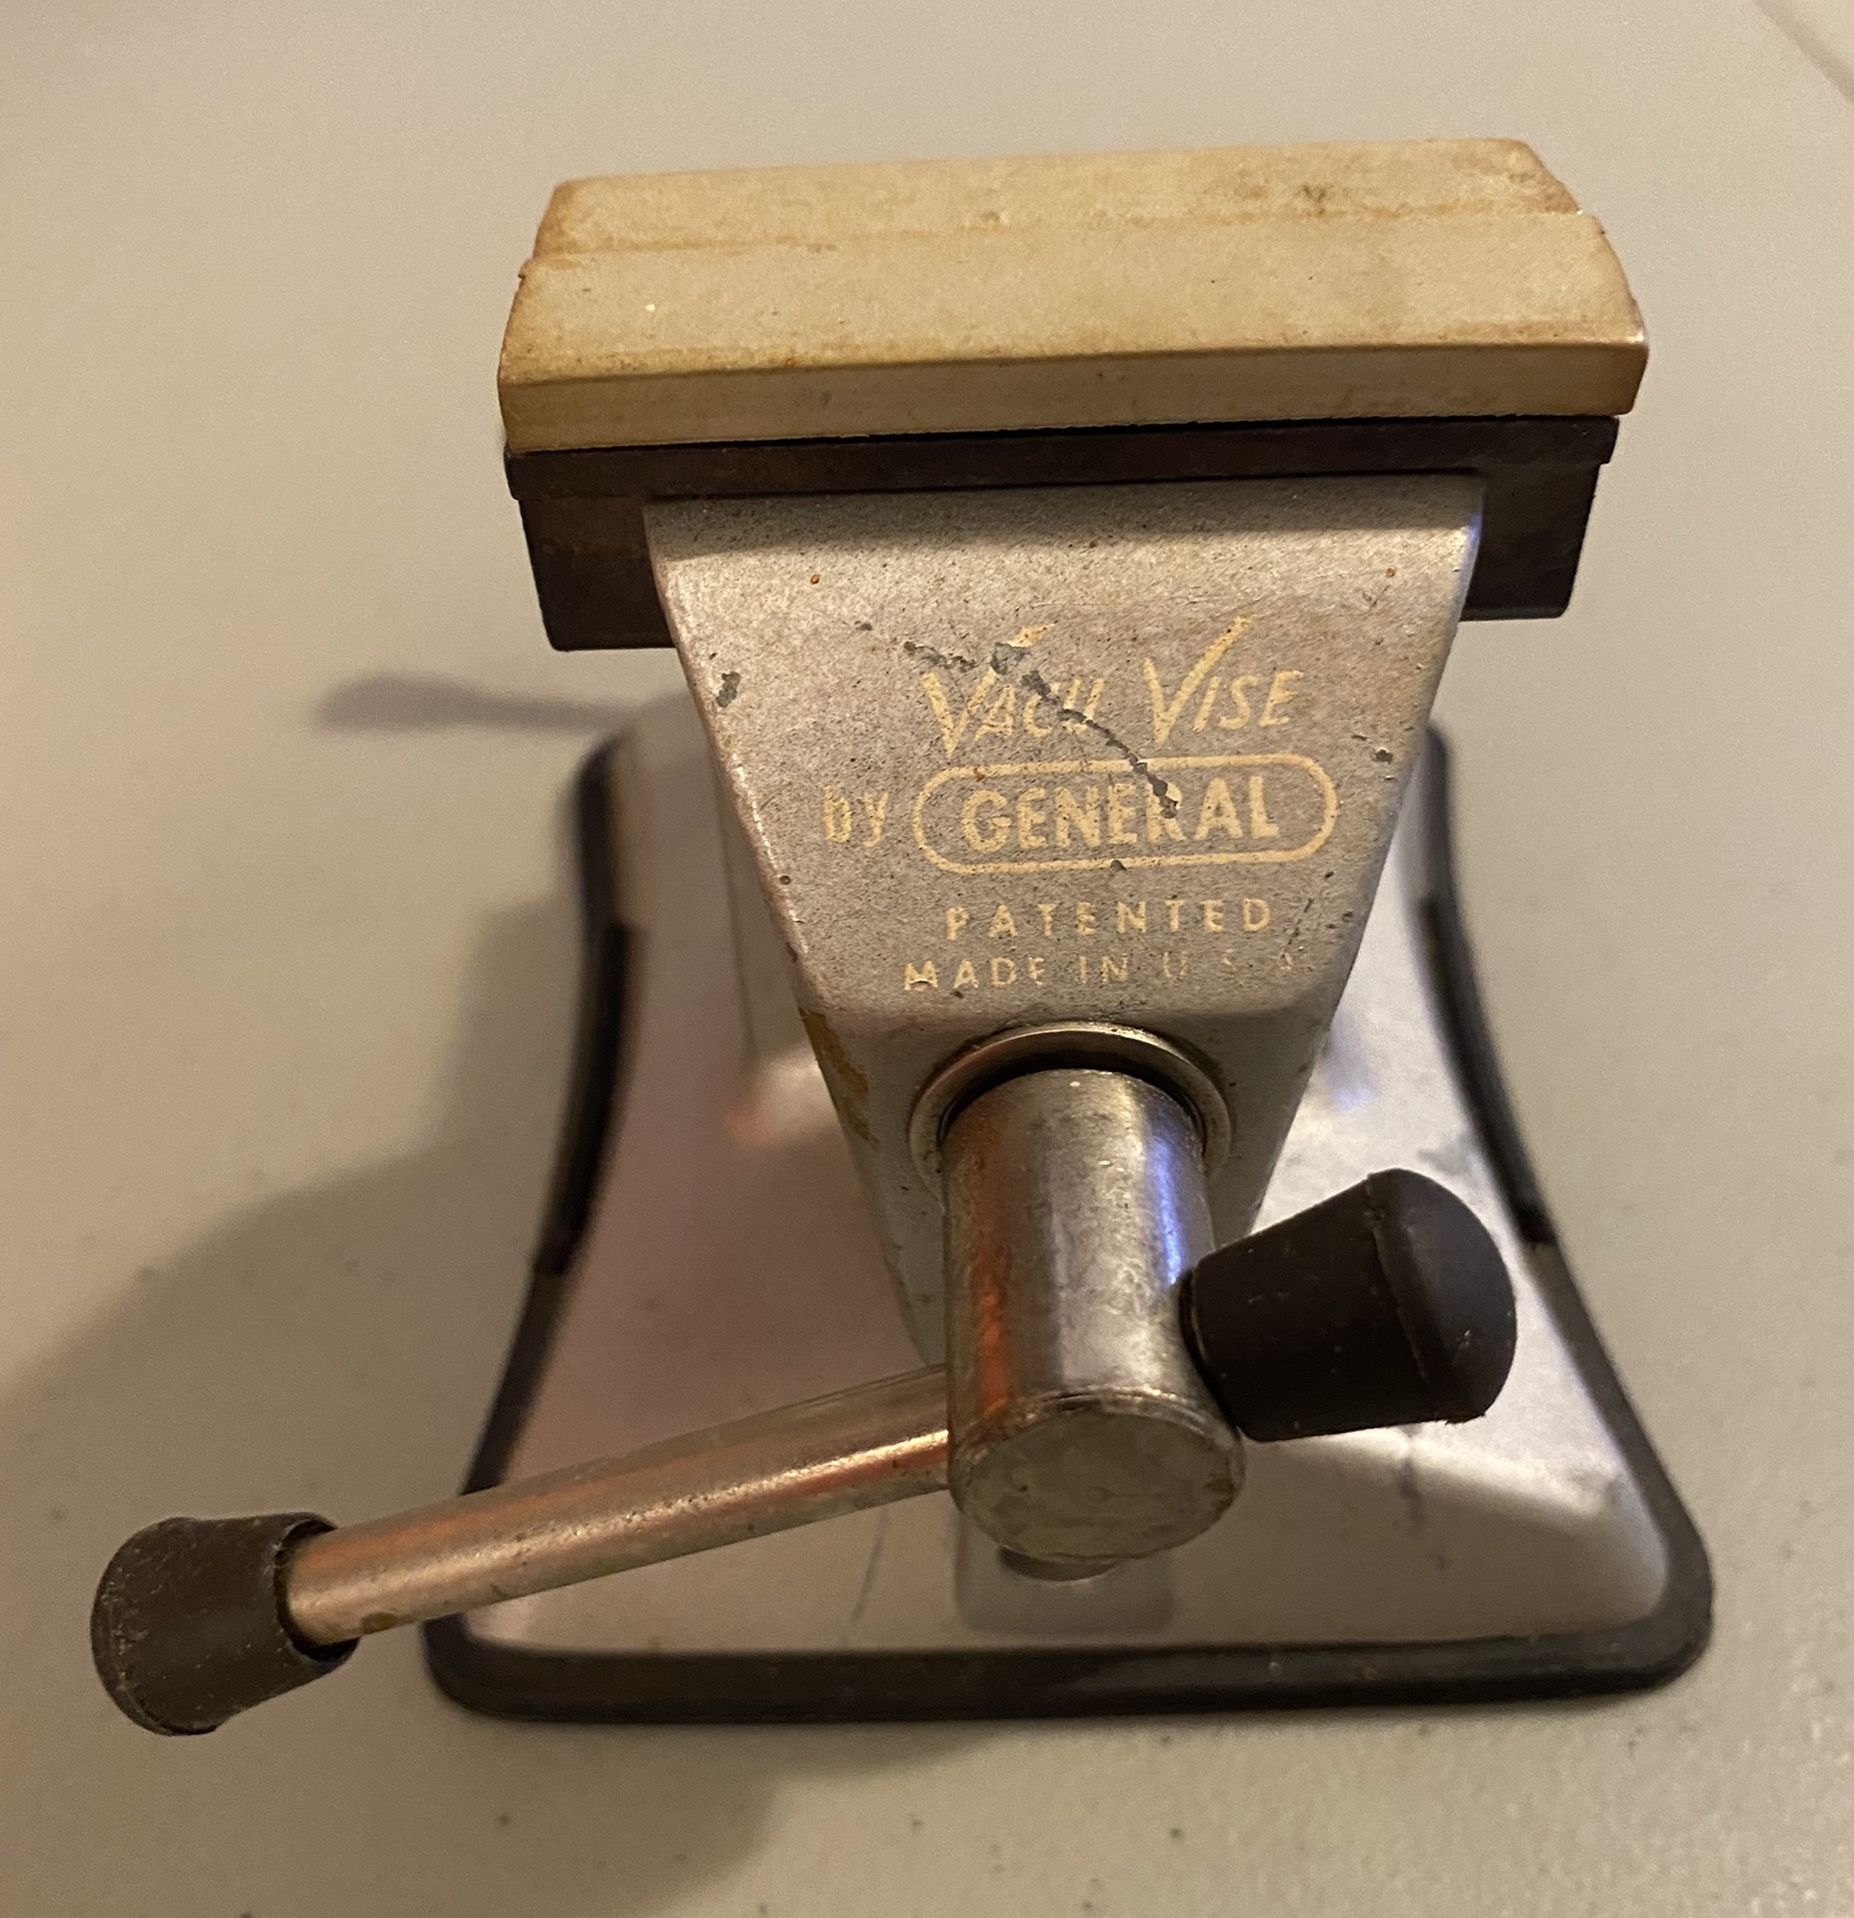 Vintage "Vacu Vise" By General Made In U.S.A . 2.5” Jaw Opening. 1.25” throat depth, 2.5” max opening. Includes jaw covers as shown. Owners marks engr